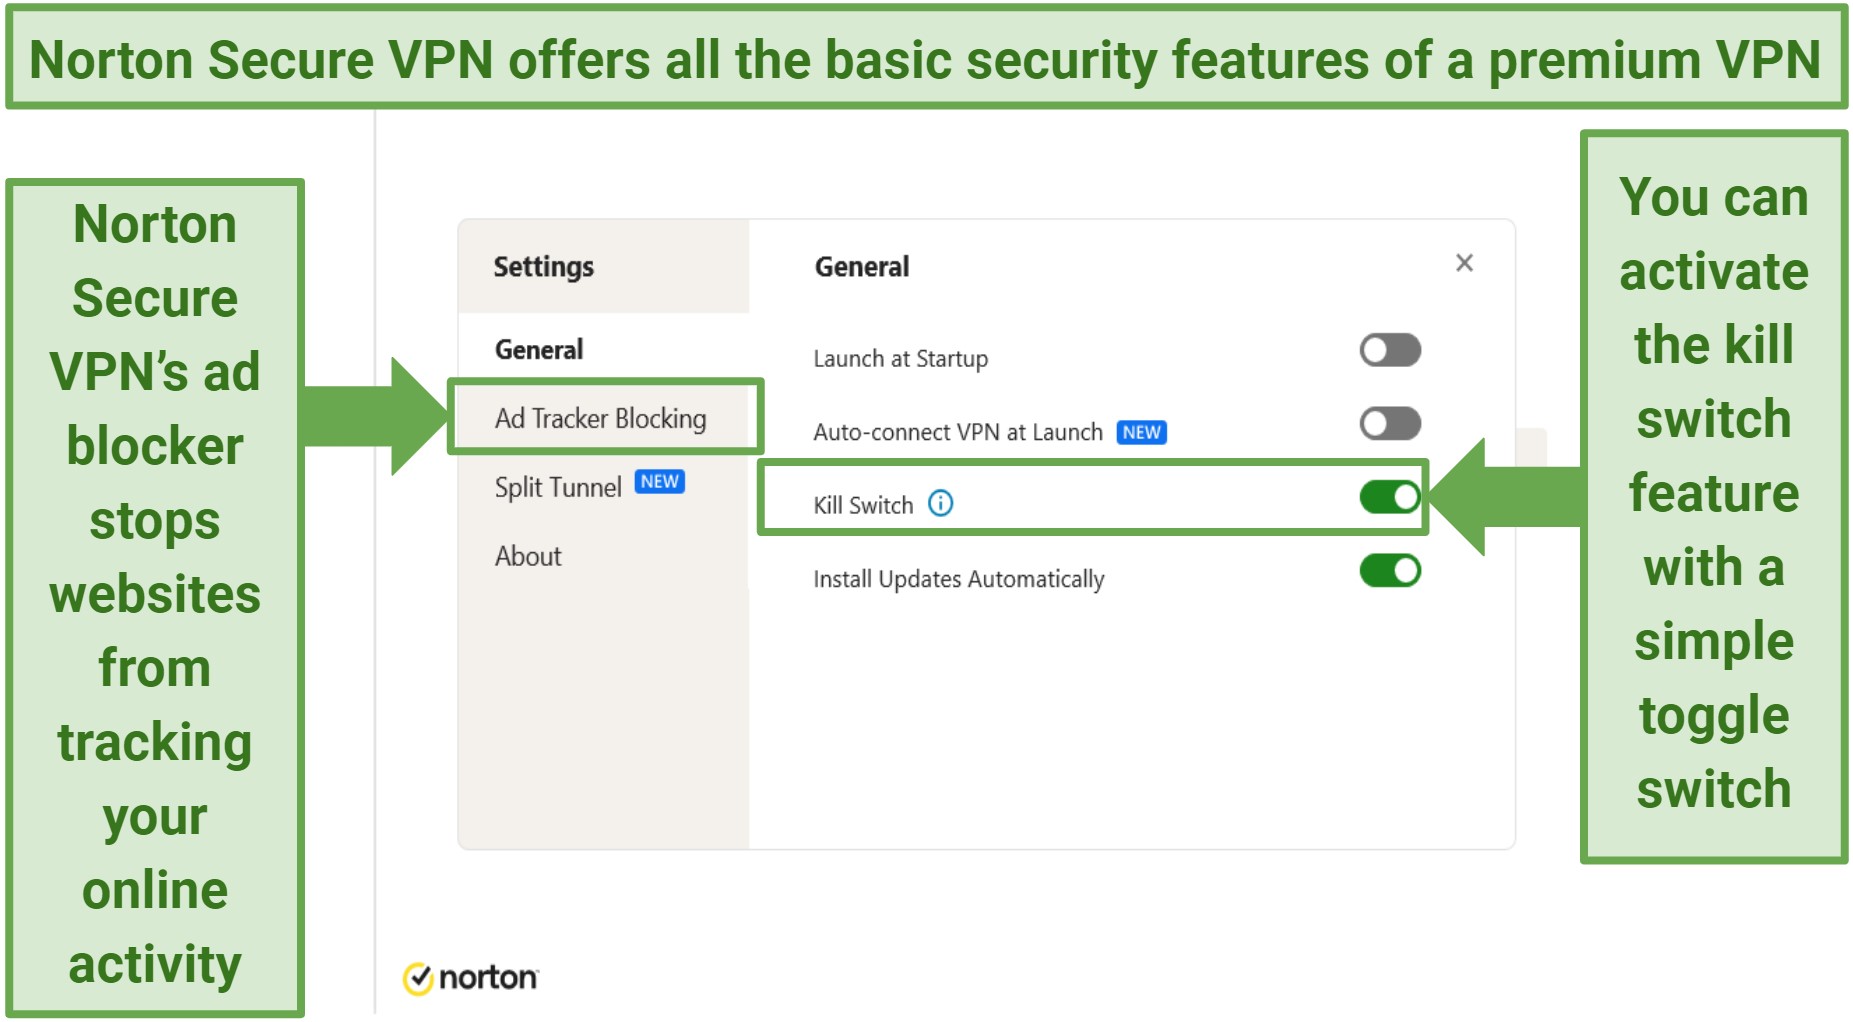 Screenshot of Norton Secure VPN's features showing its security features, like kill switch and ad blocker